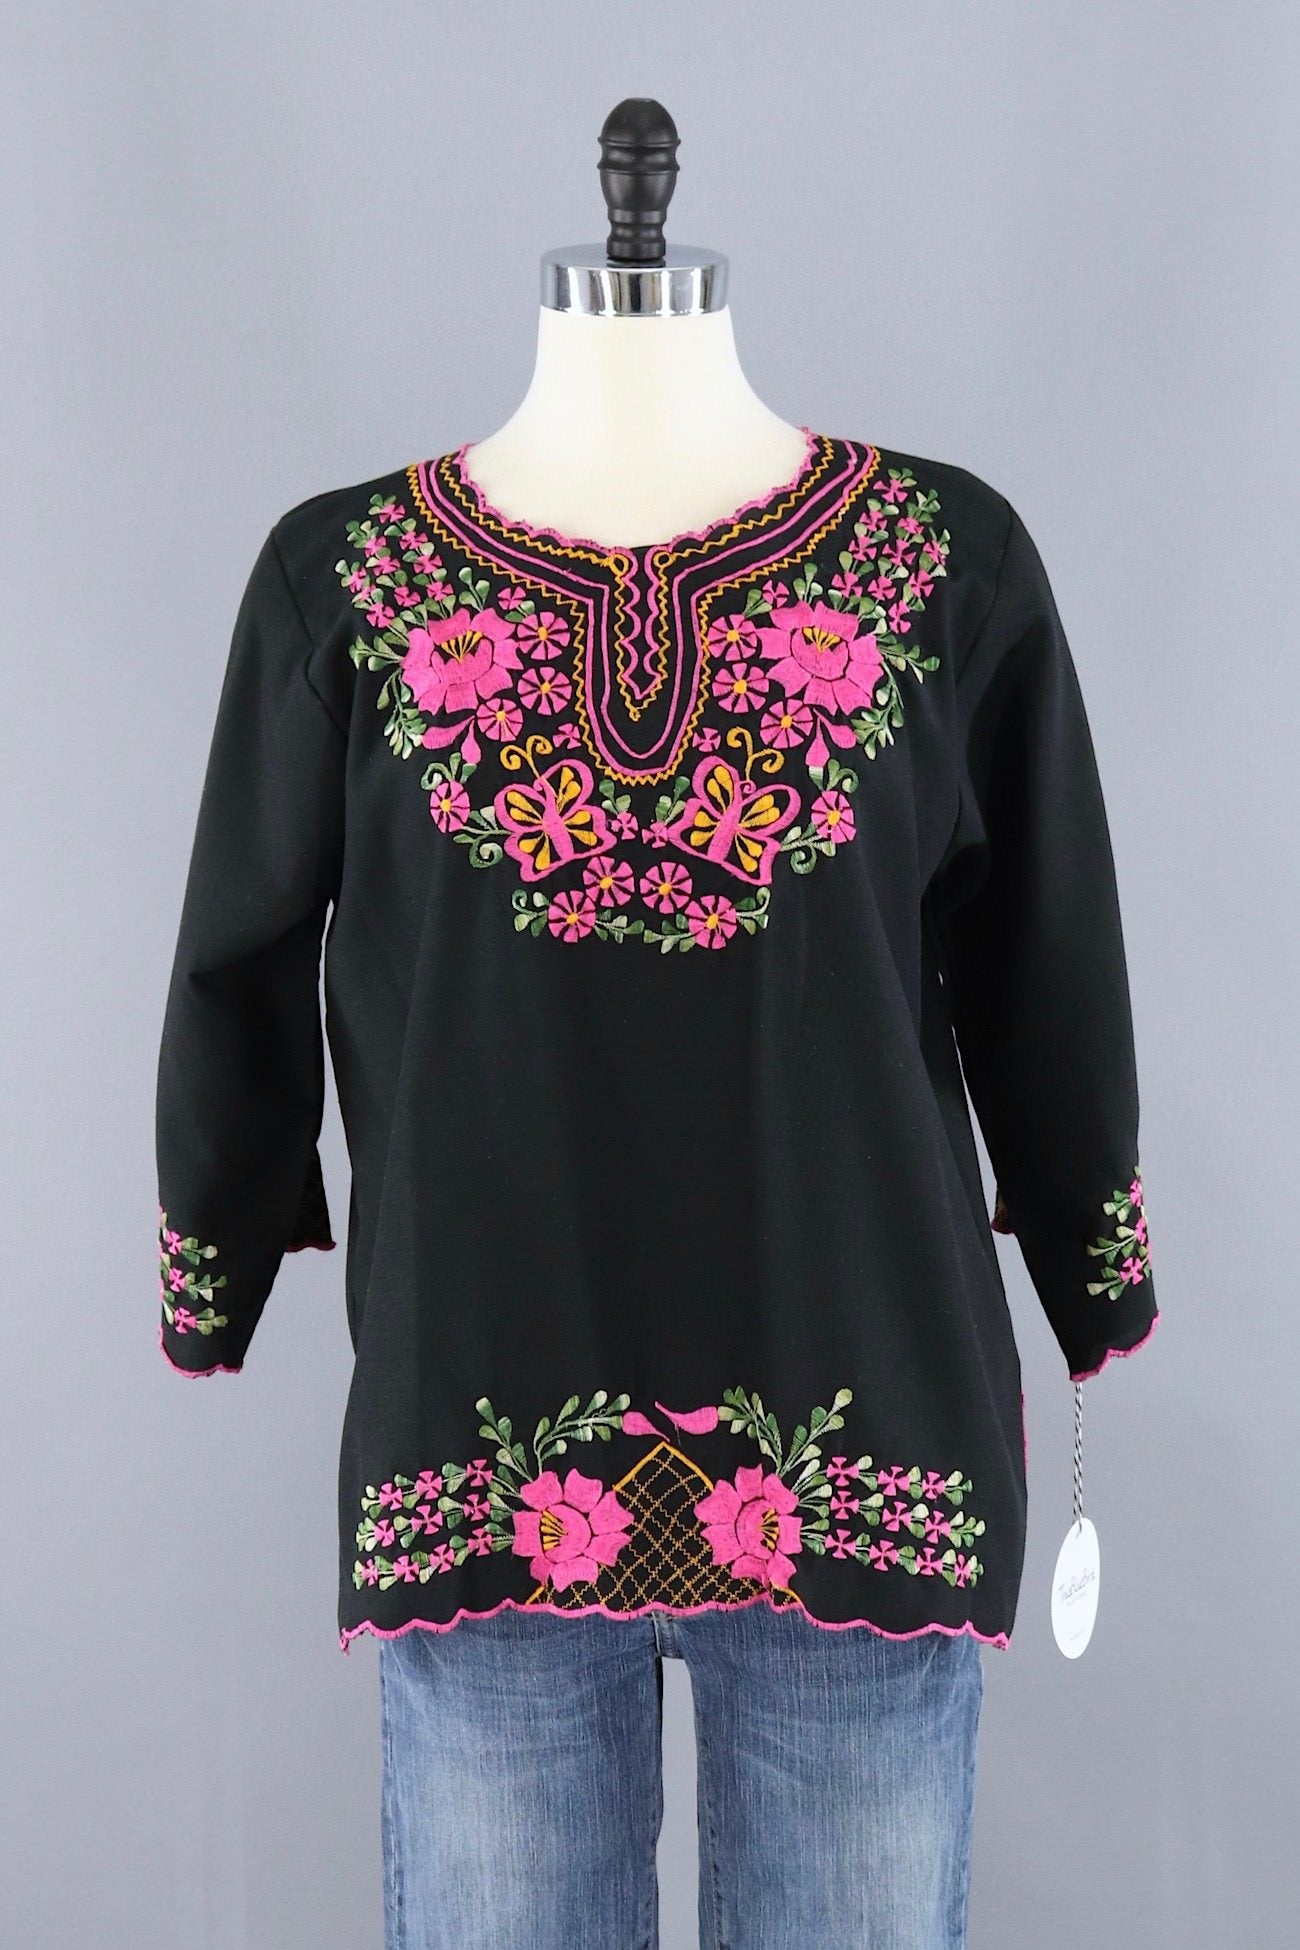 Vintage 1970s Black Mexican Embroidered Tunic Blouse - ThisBlueBird